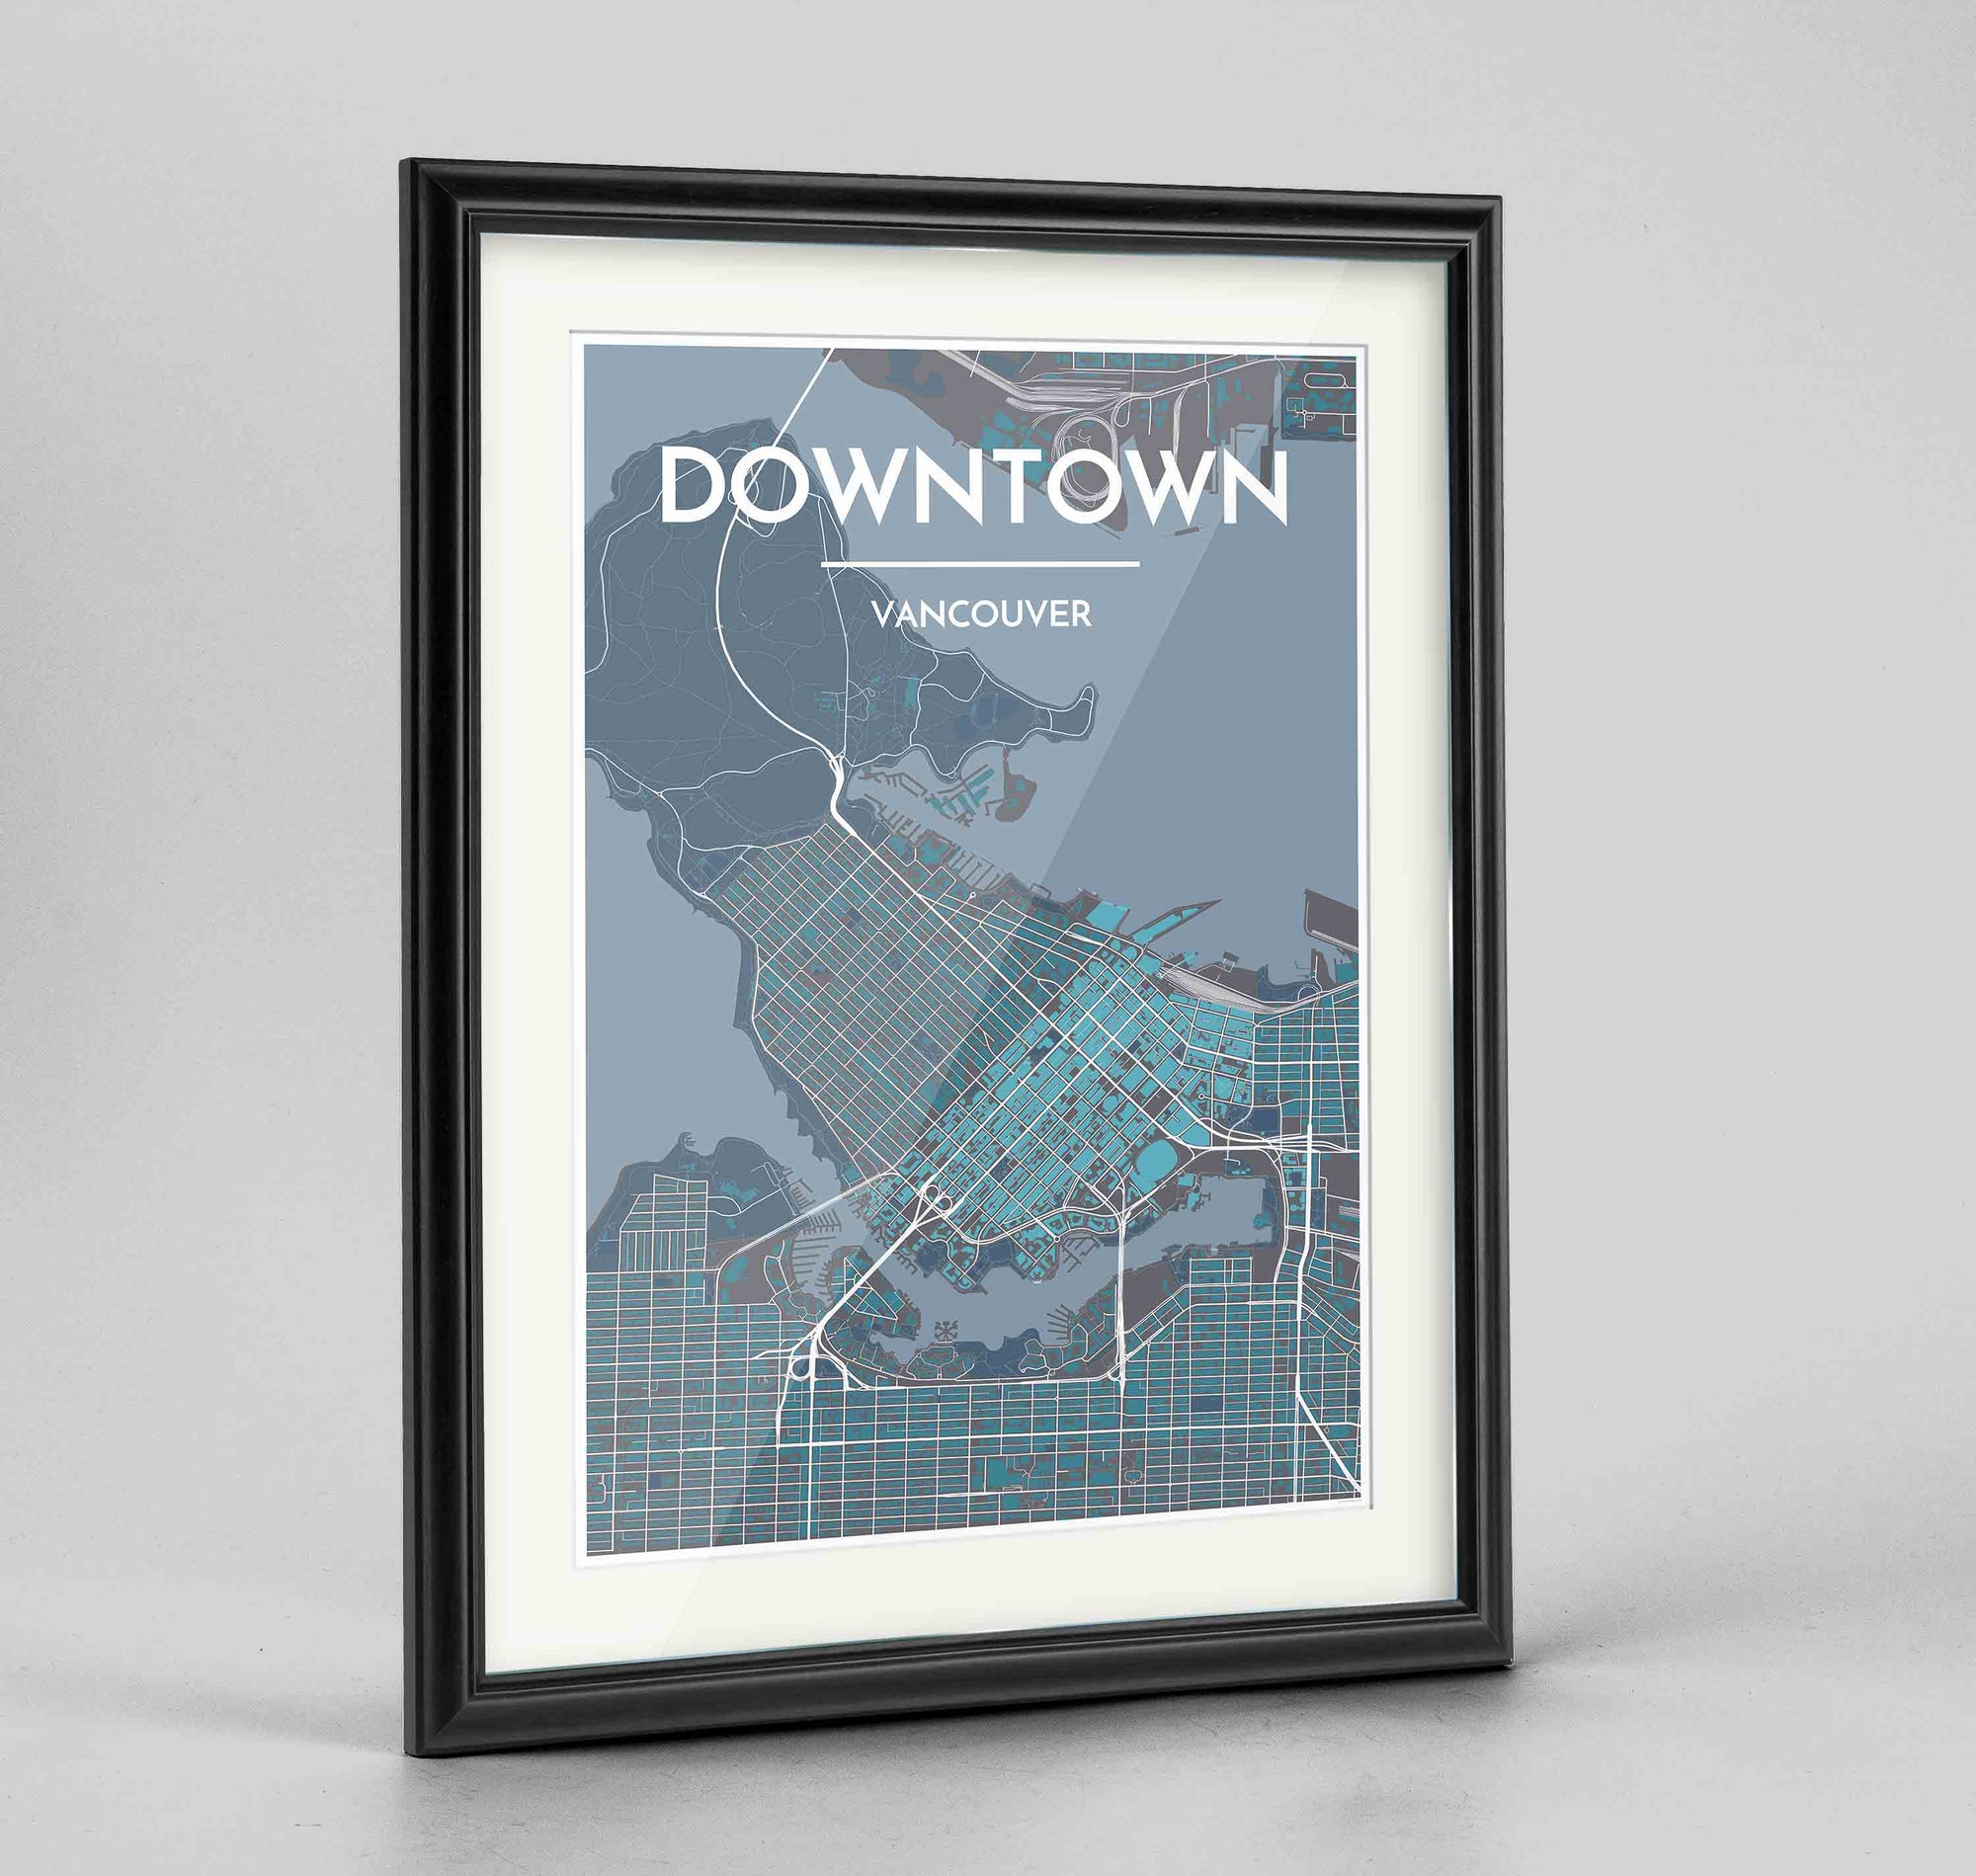 Framed Downtown Vancouver Map Art Print 24x36" Traditional Black frame Point Two Design Group